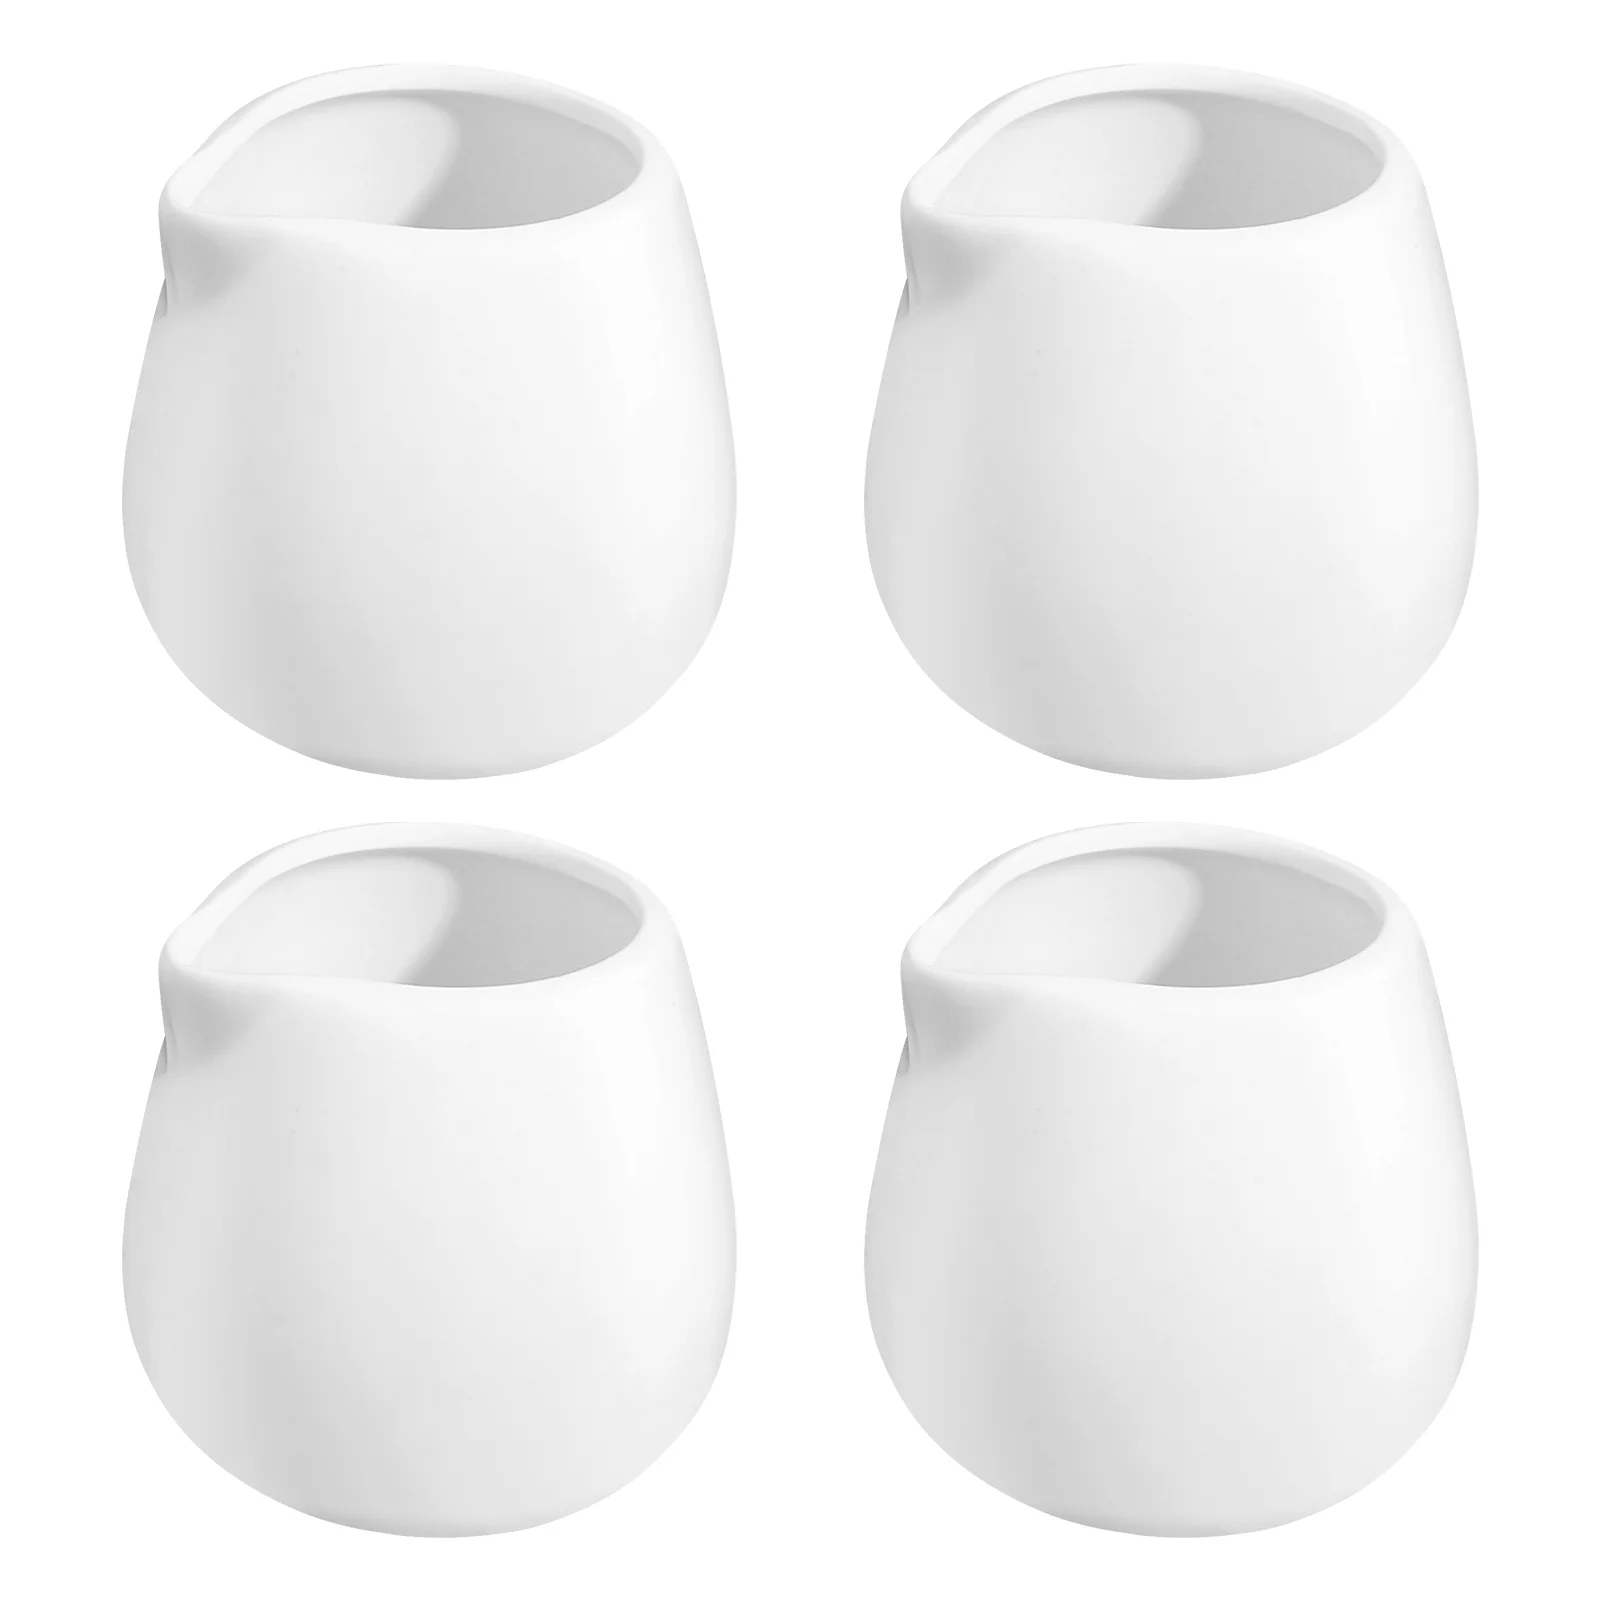 

Milk Ceramic Mini Creamer White Pitcher Jug Sauce Coffee Pitchers Cups Jugs Handle Without Cup Cream